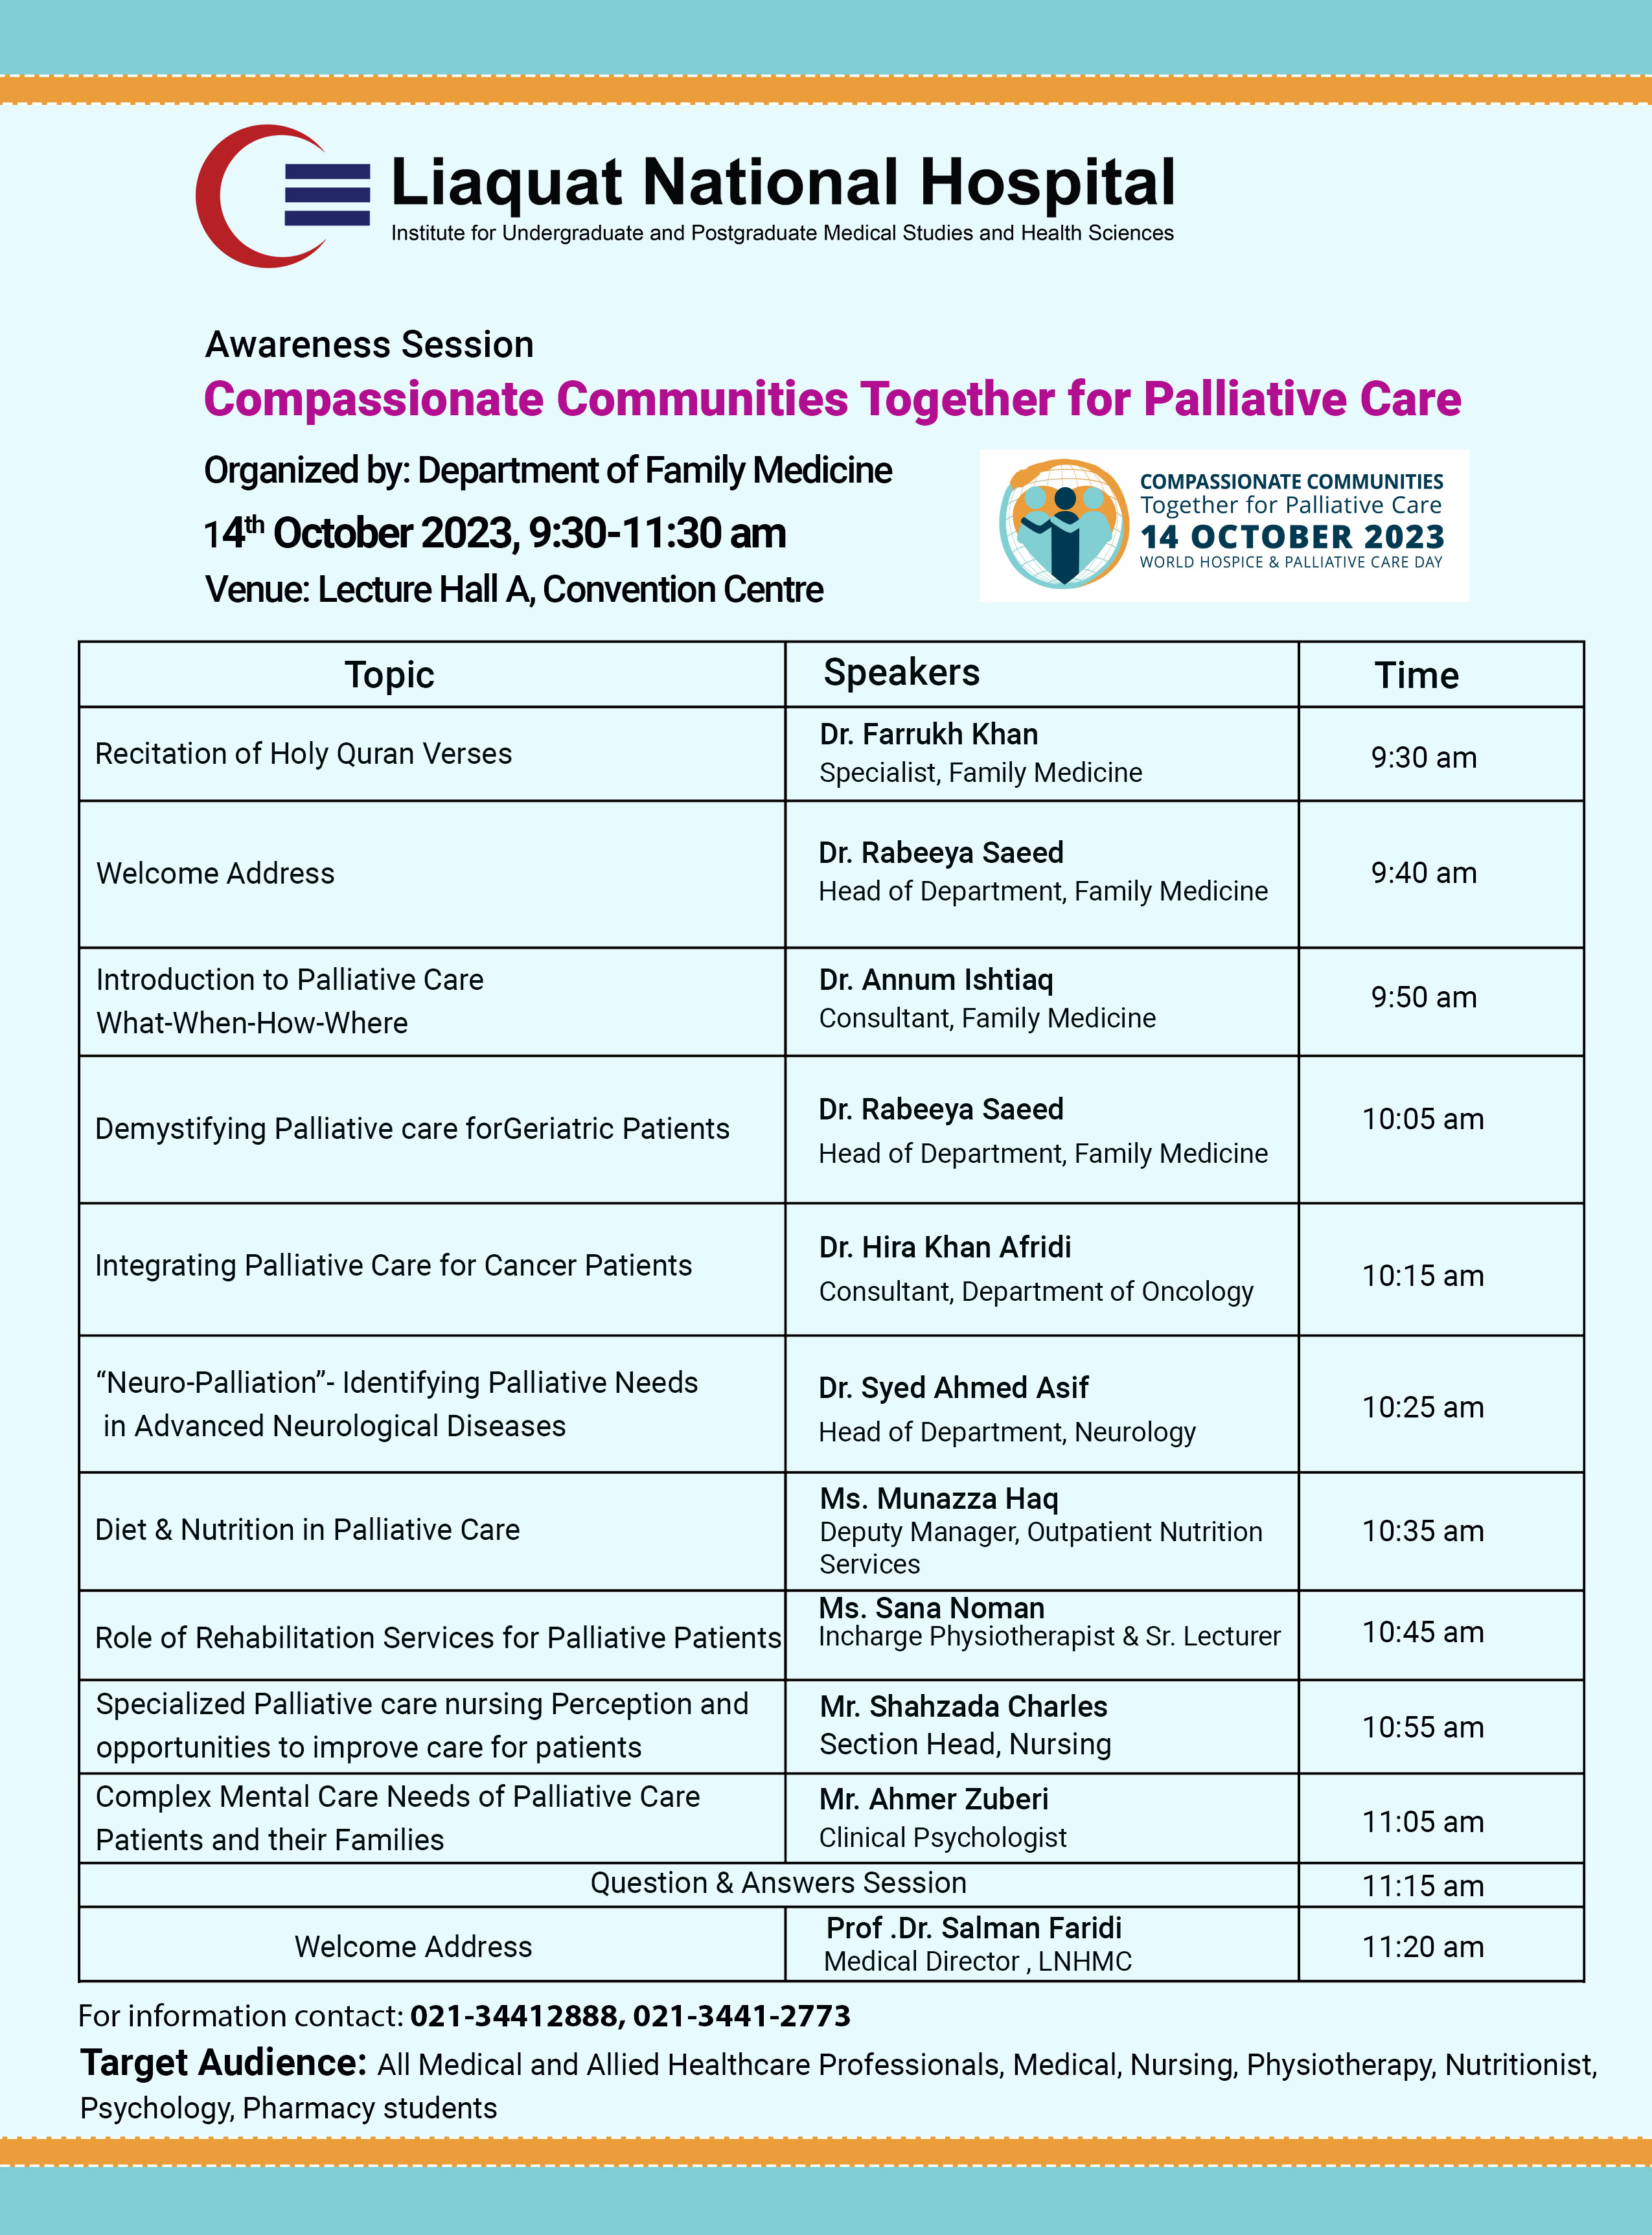 Awareness Session on Compassionate Communities Together for Palliative Care